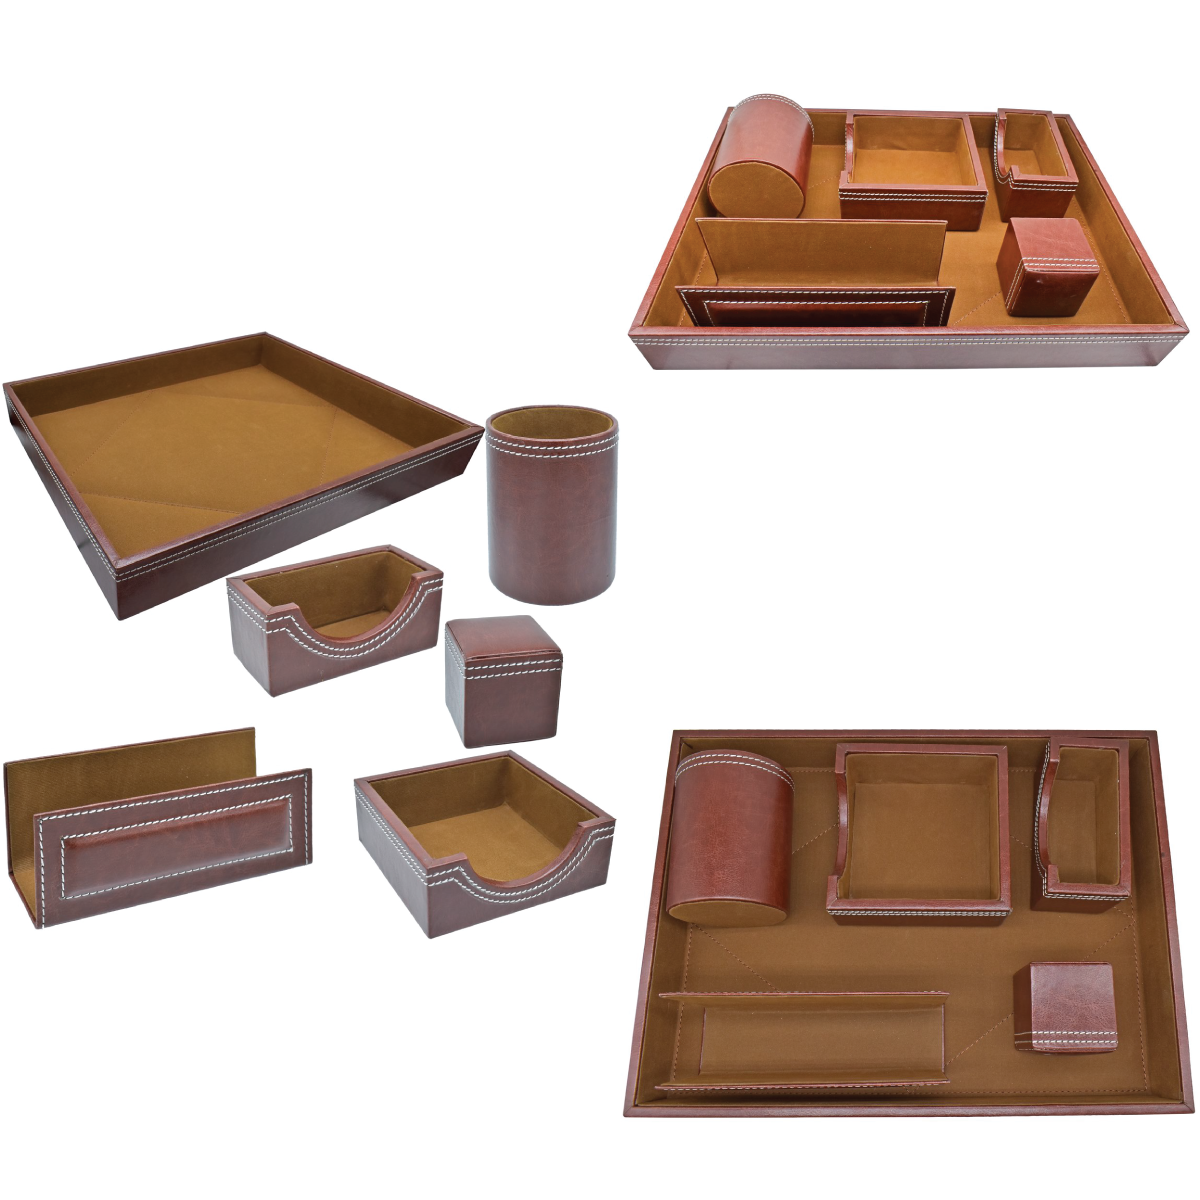 Brown 6in1 Premium Leather Table Stationery Combo Set - For Office Use, Personal Use, Corporate Gifting, Return Gift JATSS601